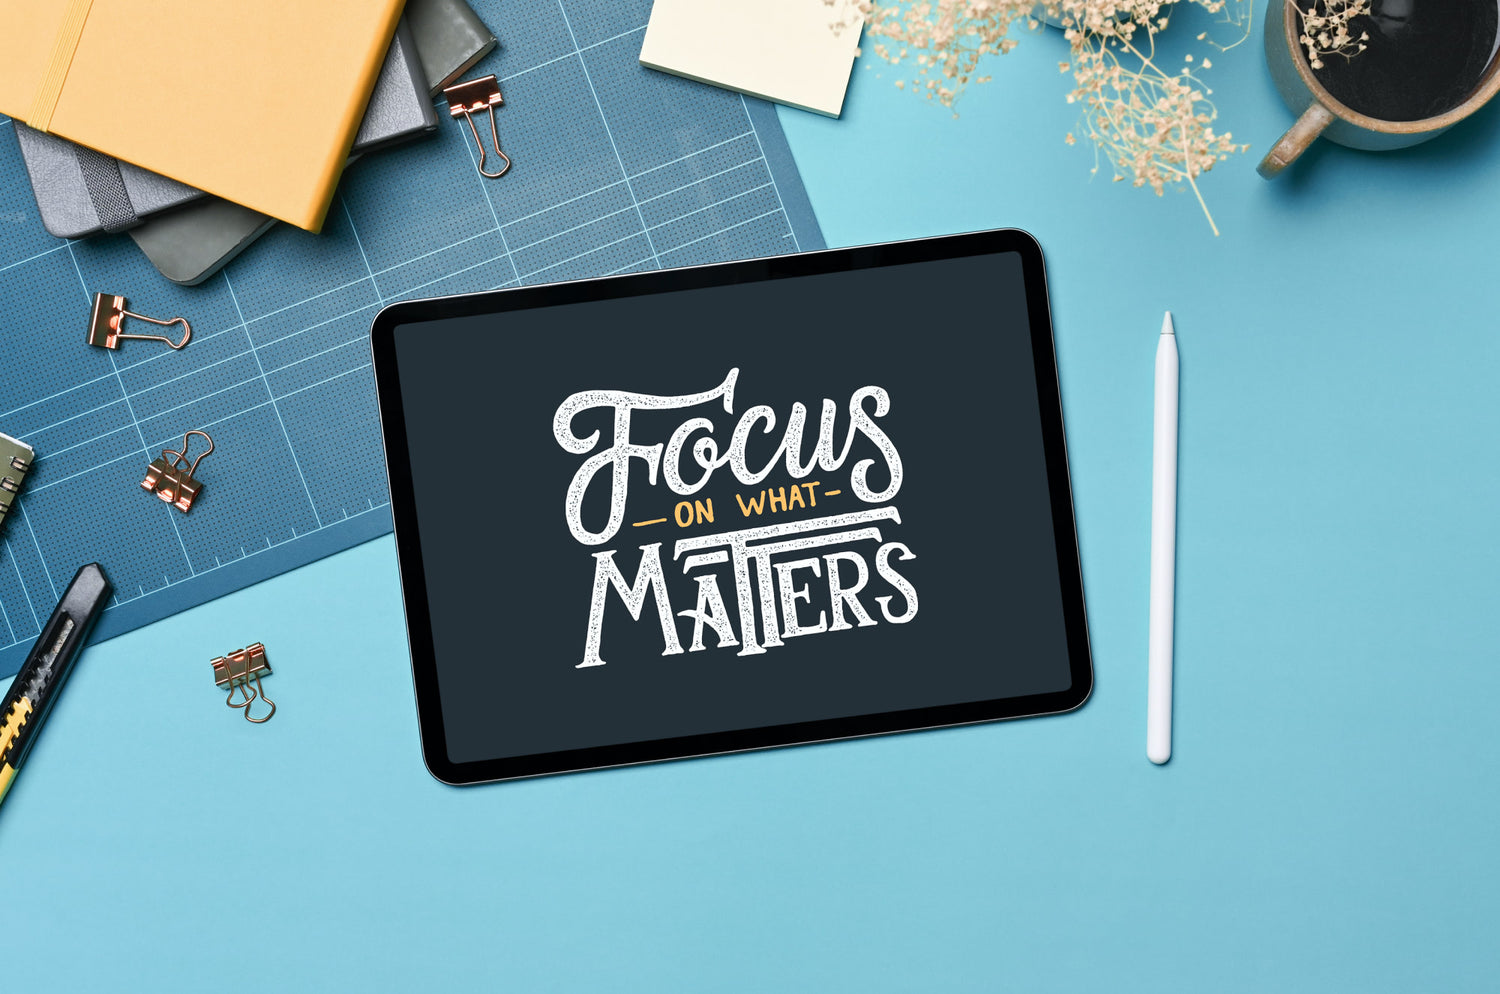 An image of an iPad surrounded by stationery supplies and an Apple Pencil with lettering that says, "Focus on what matters".